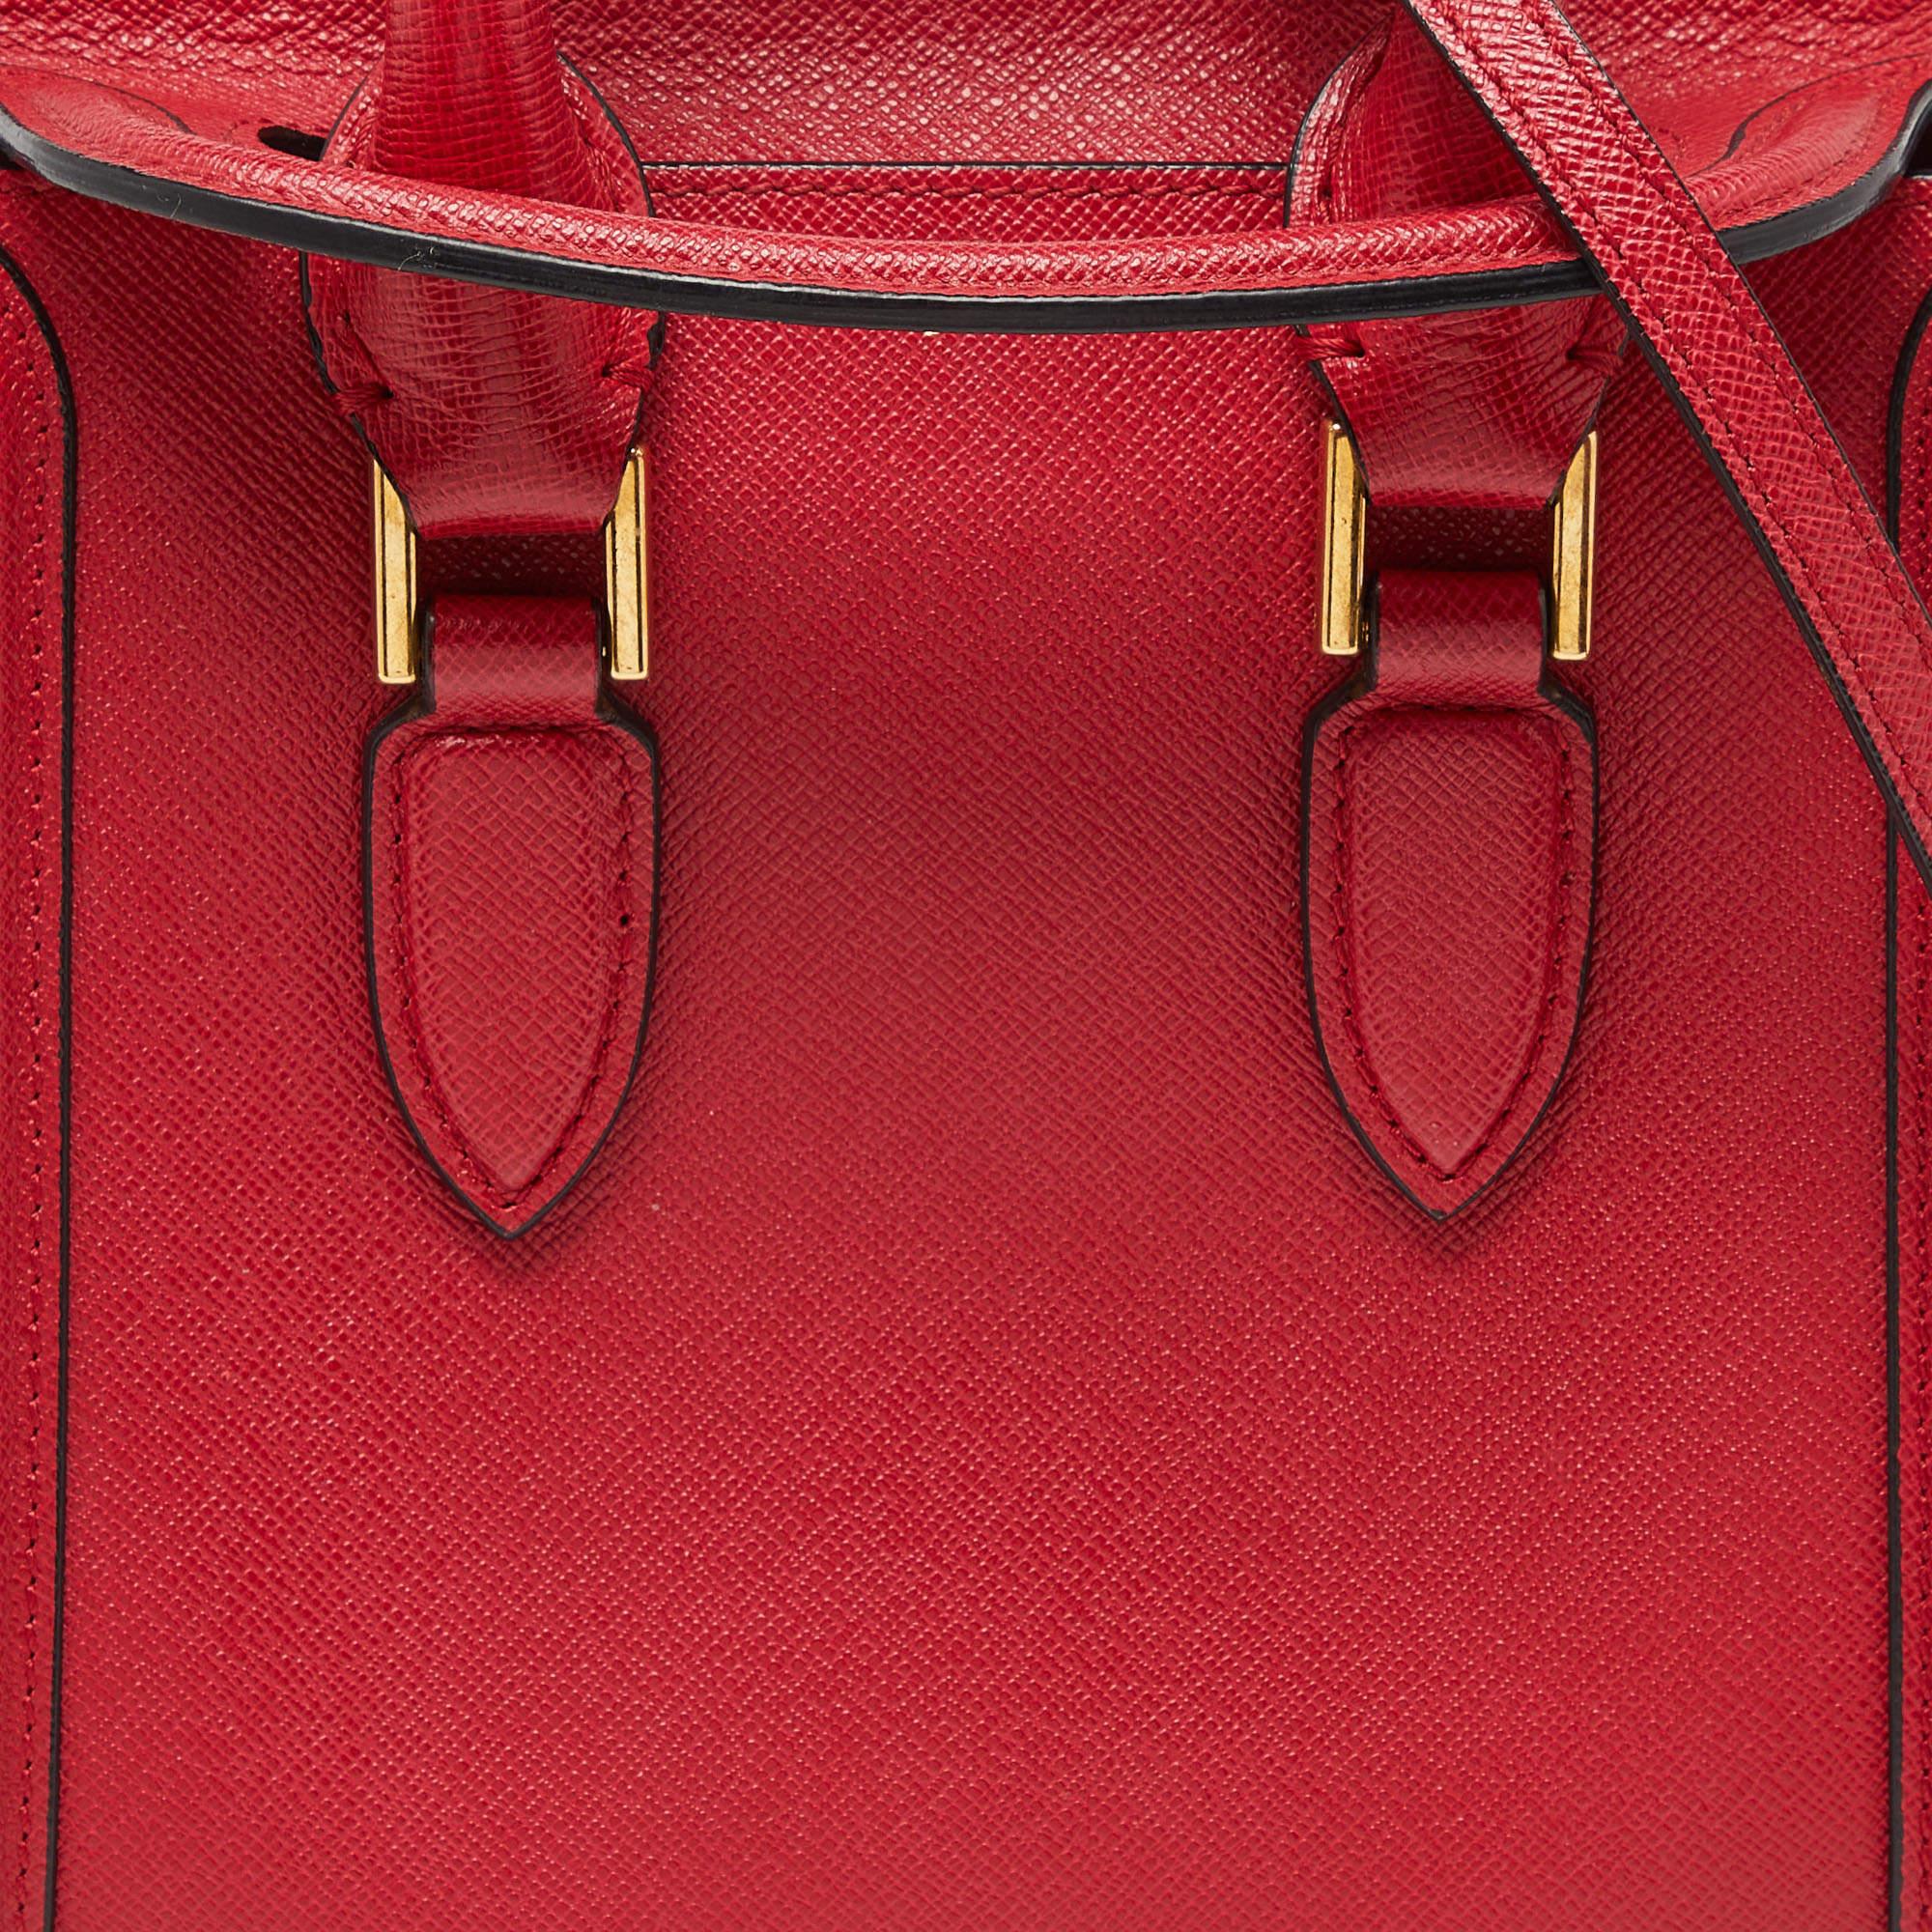 Alexander McQueen Red Leather Mini Heroine Bag For Sale 7